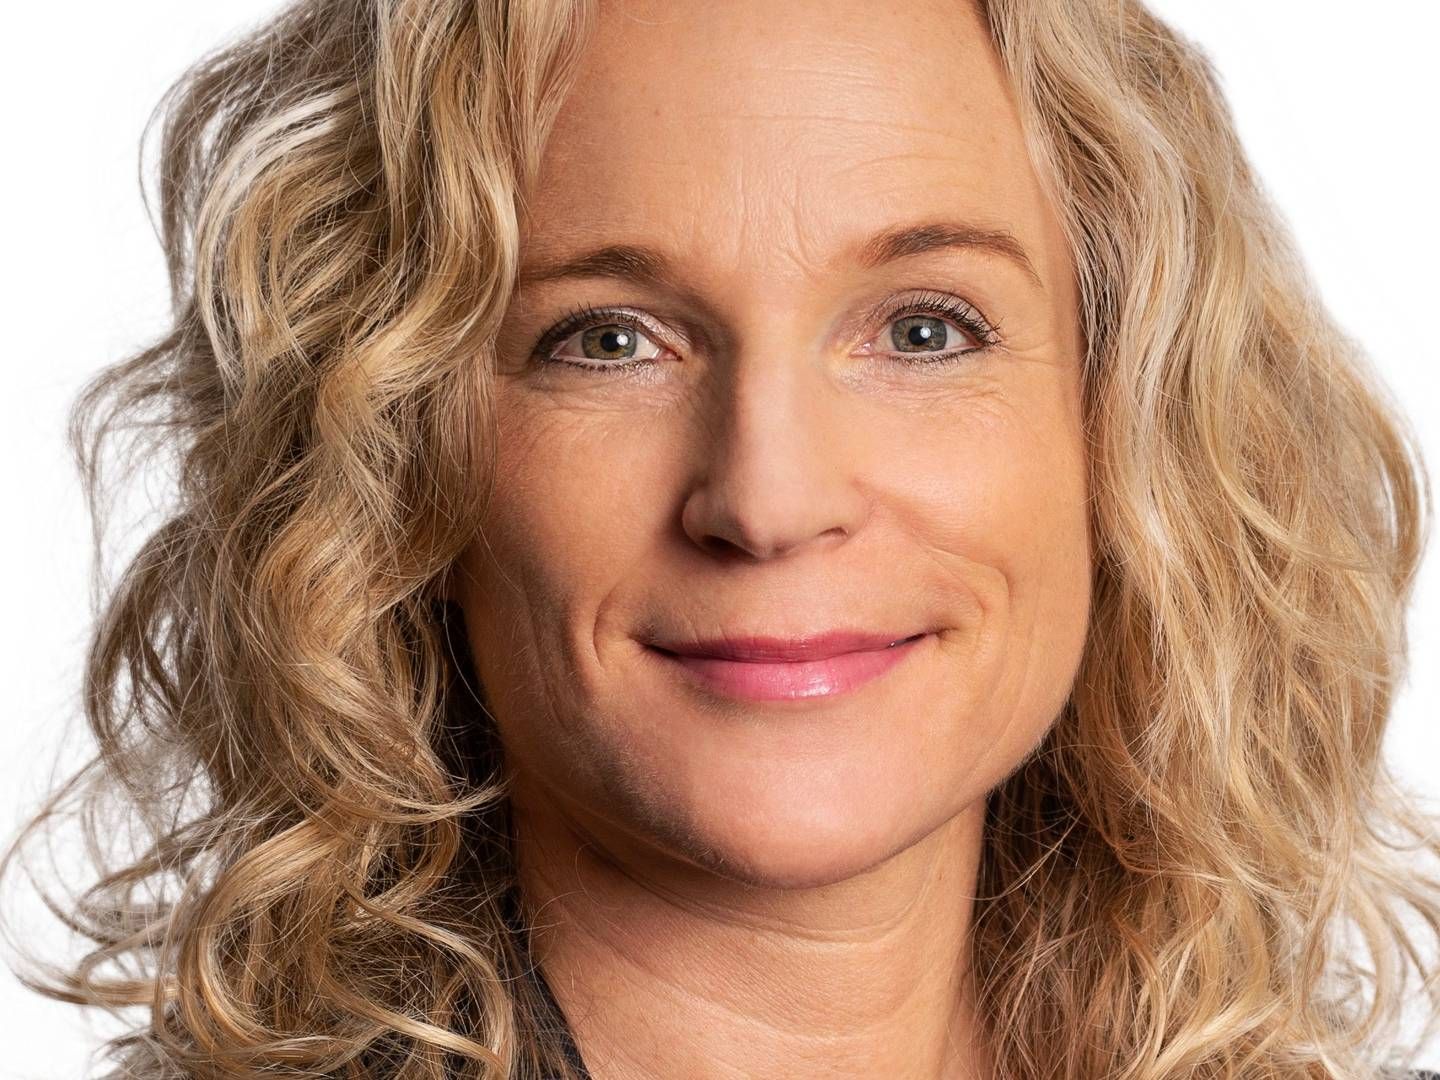 ”You get a bit less for selling ships to a good scrapping dock than to a bad one in Bangladesh, but not much less – maybe five percent. But someone has to be willing to pay that, or it won’t pay off for docks to invest in good facilities,” says Pia Meling, CEO, Grieg Green. | Photo: Pia Meling